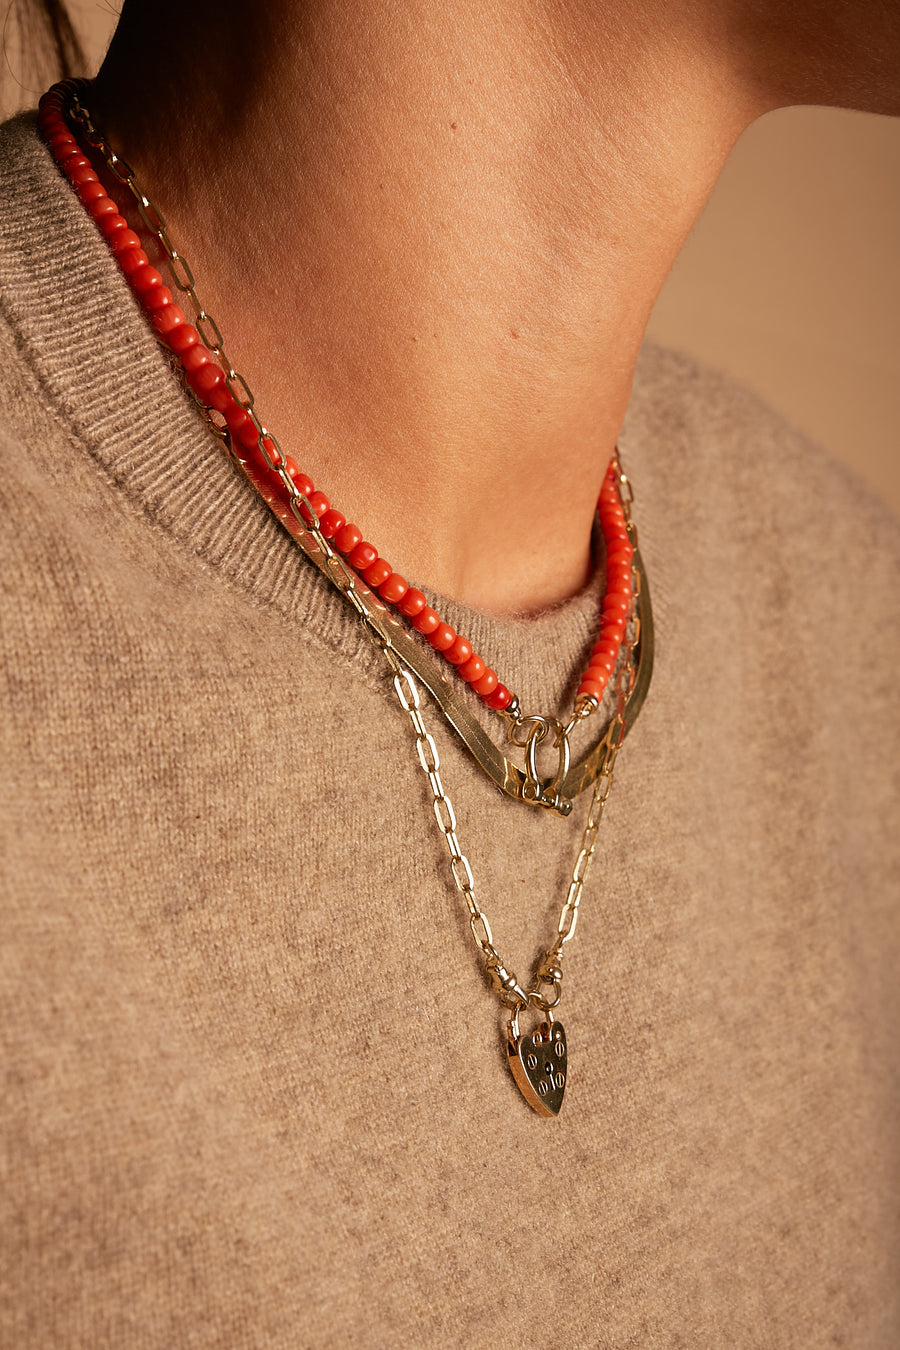 Hot Pepper Necklace